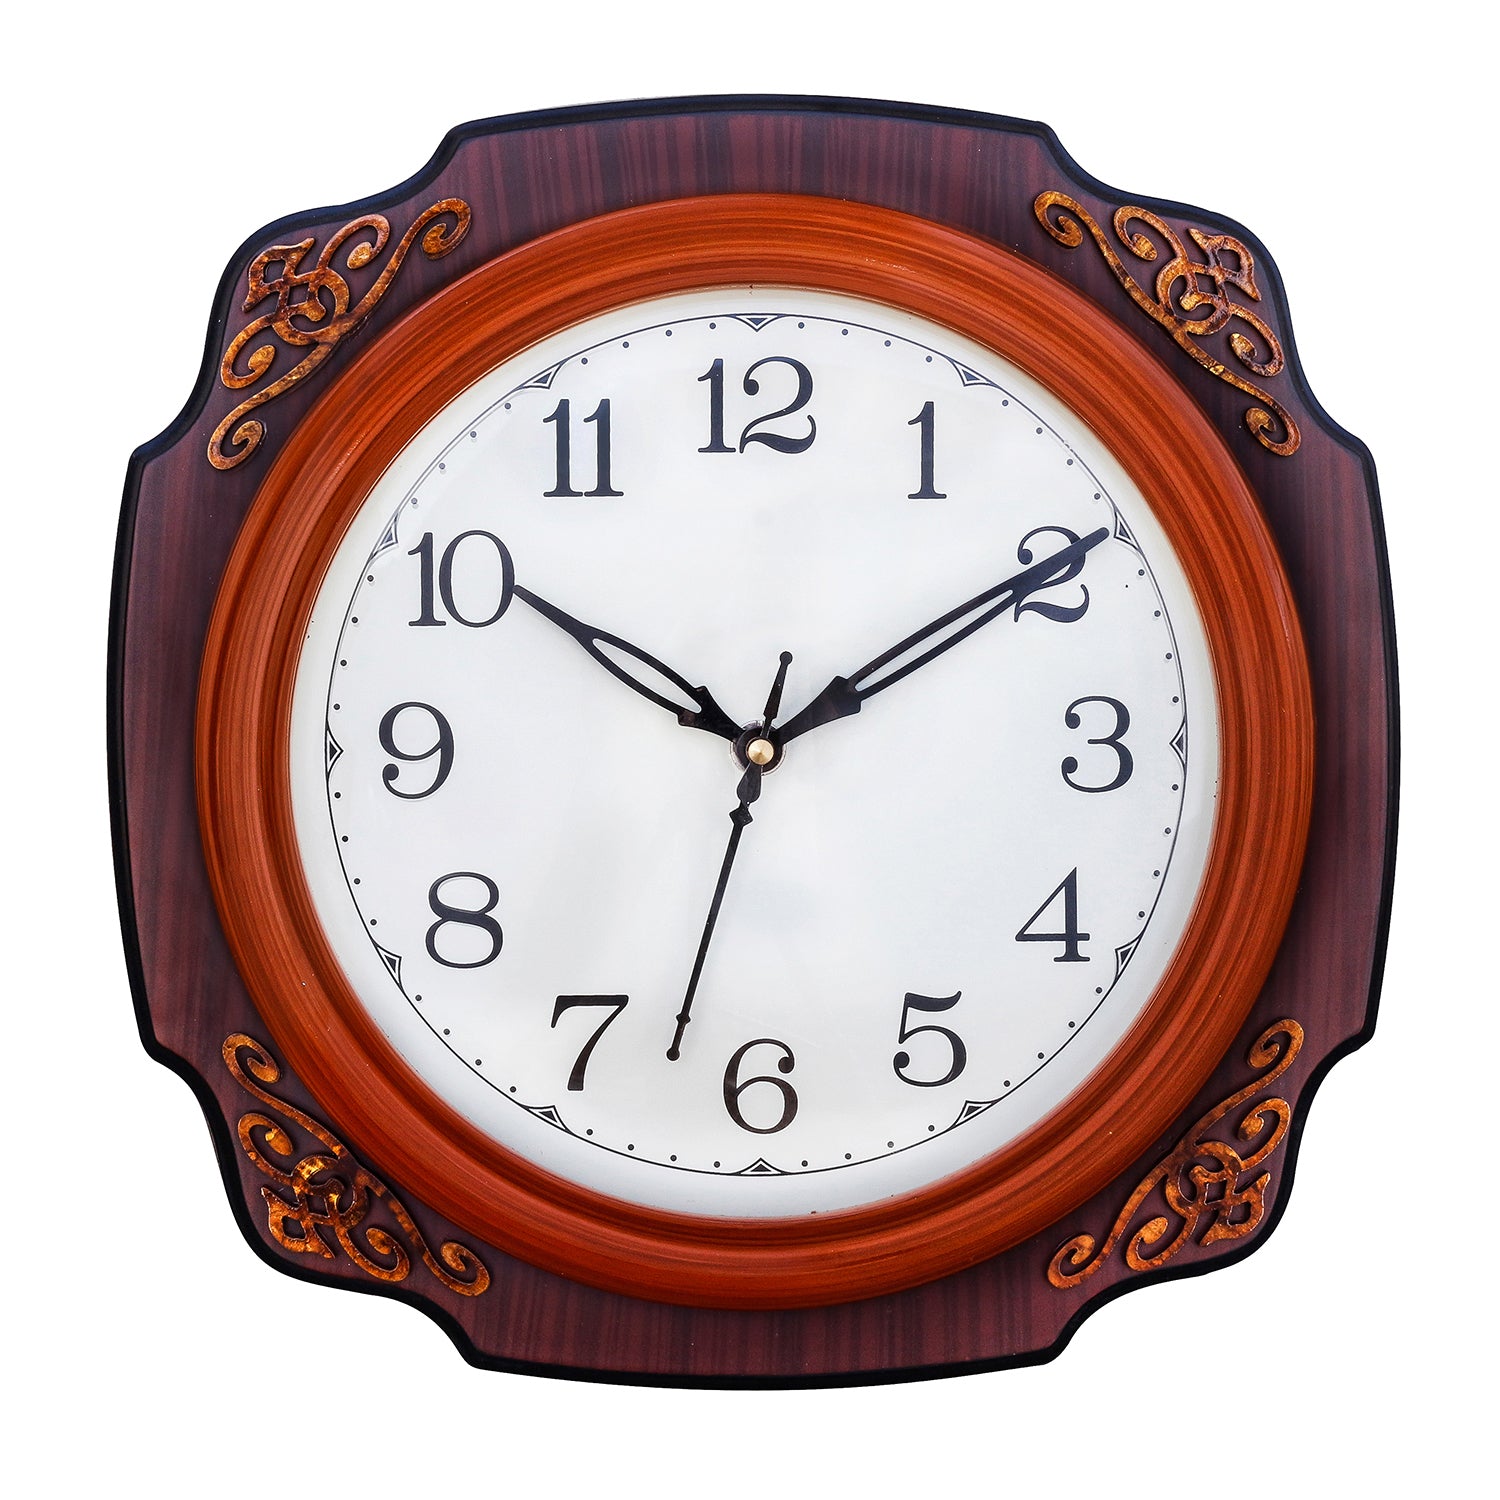 Cola Brown square wooden analog wall clock(25.4 cm x 25.4 cm)